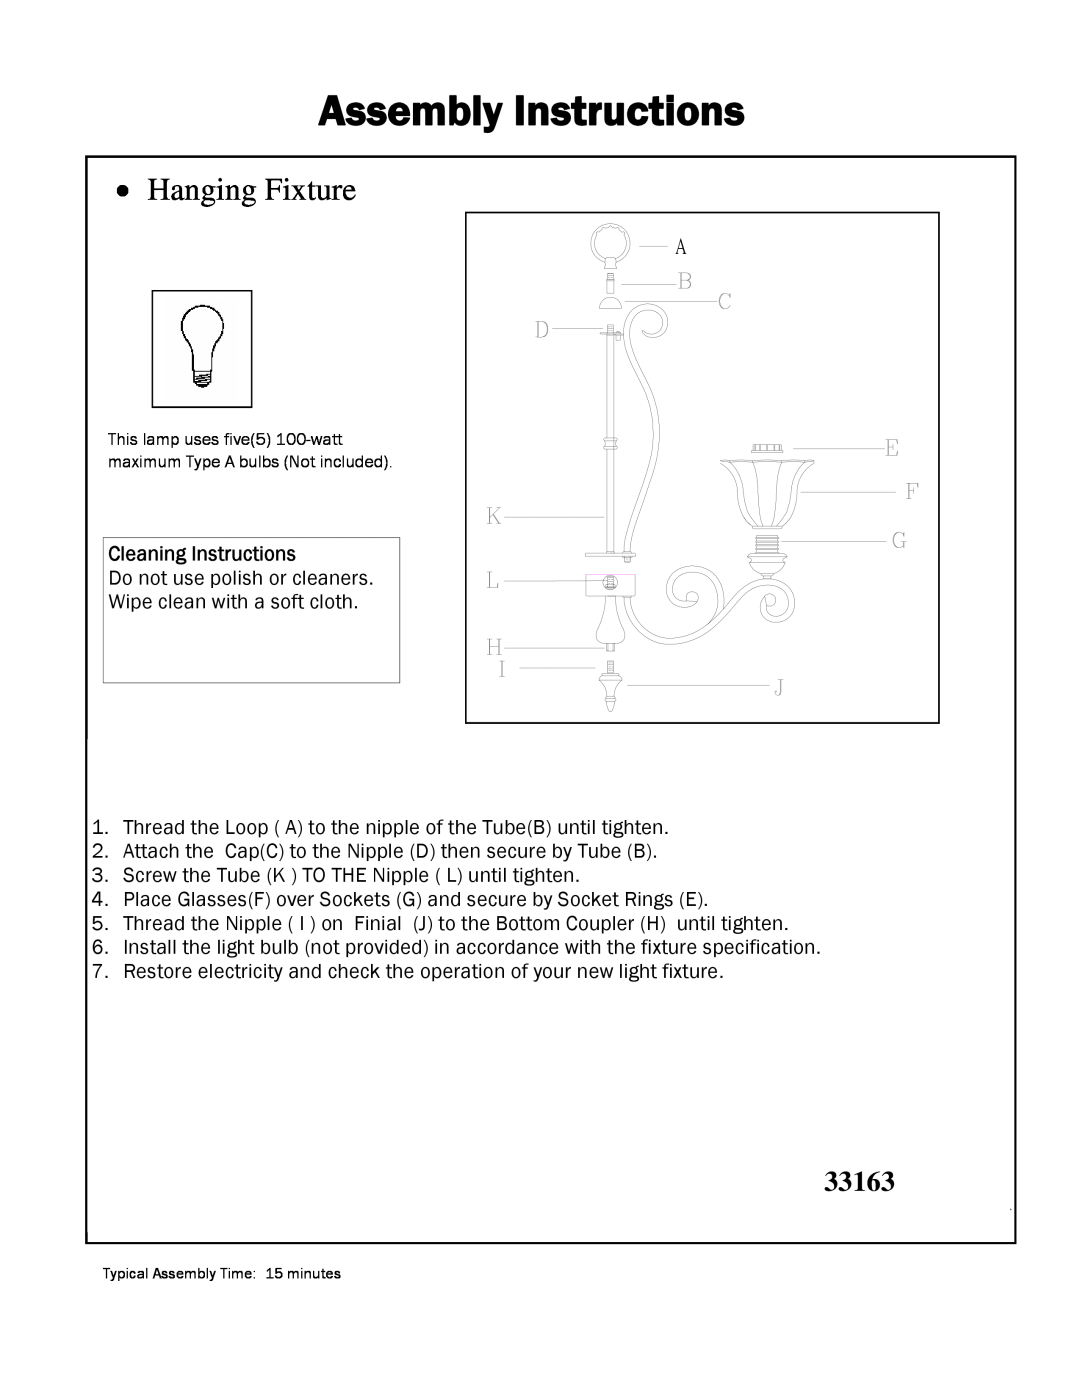 Triarch 33163 manual Assembly Instructions, Hanging Fixture, Cleaning Instructions 